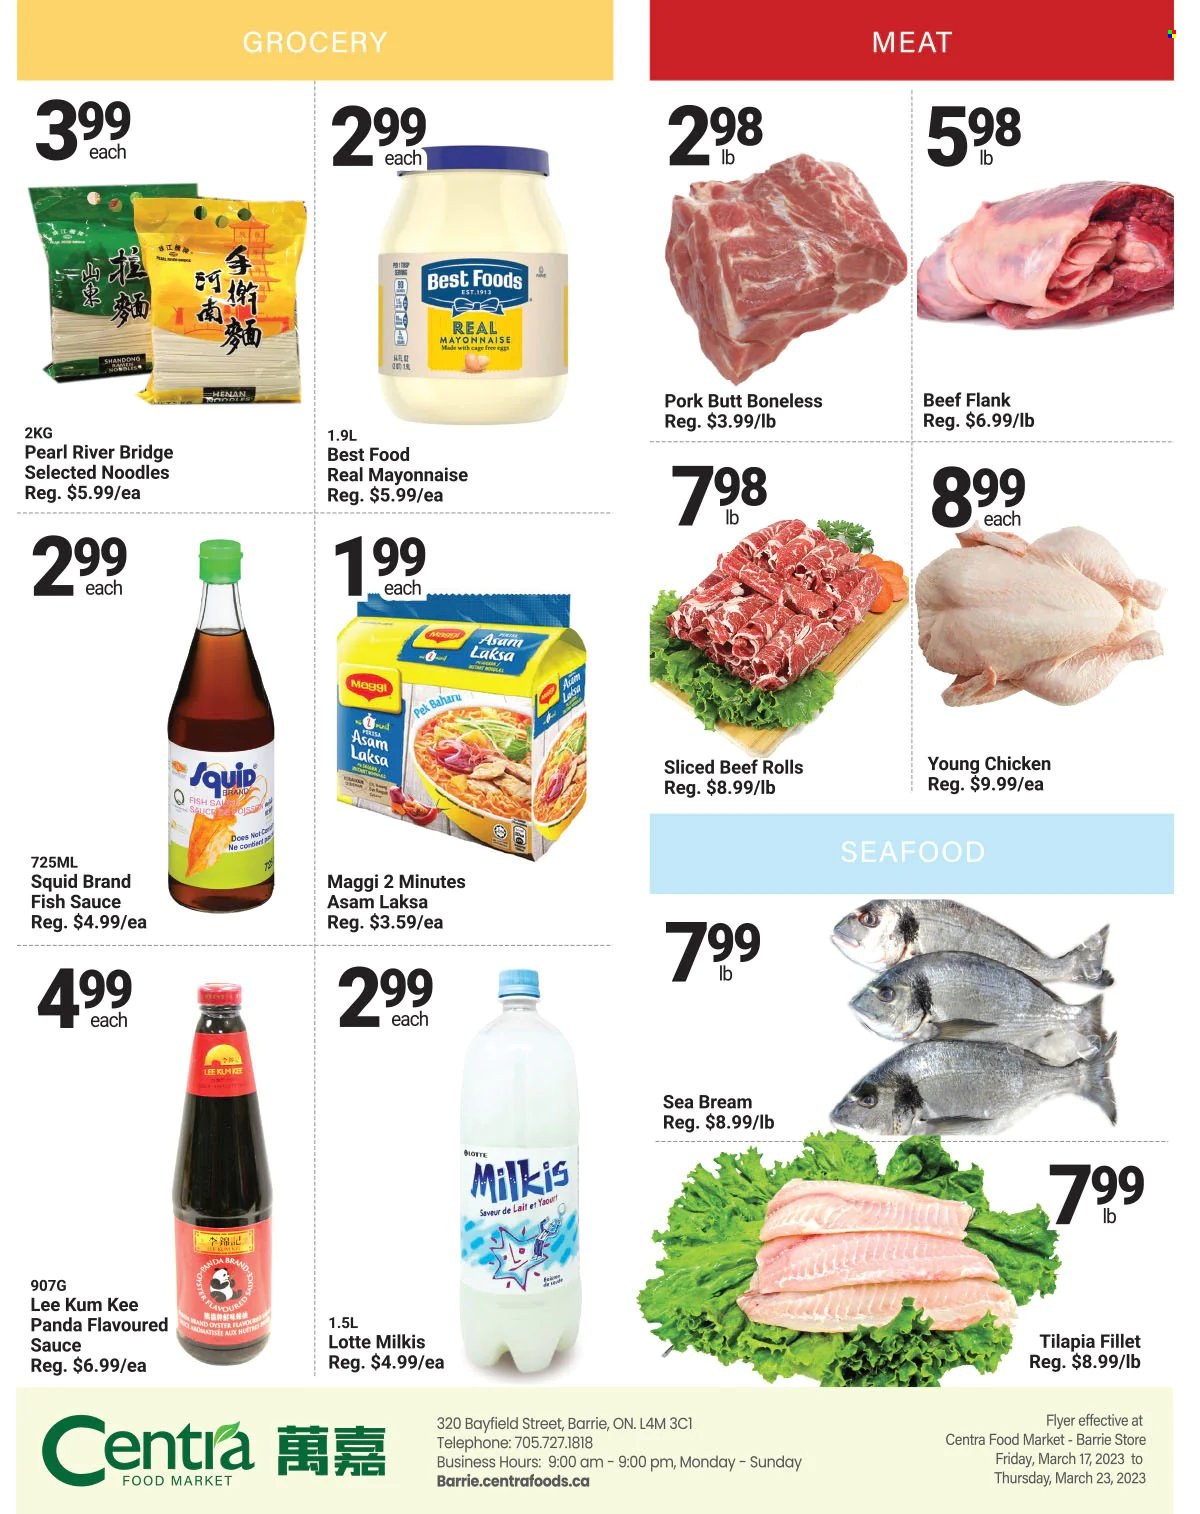 thumbnail - Centra Food Market Flyer - March 17, 2023 - March 23, 2023 - Sales products - squid, tilapia, oysters, seafood, fish, seabream, sauce, noodles, eggs, cage free eggs, mayonnaise, Maggi, fish sauce, Lee Kum Kee, chicken, pork butt. Page 4.